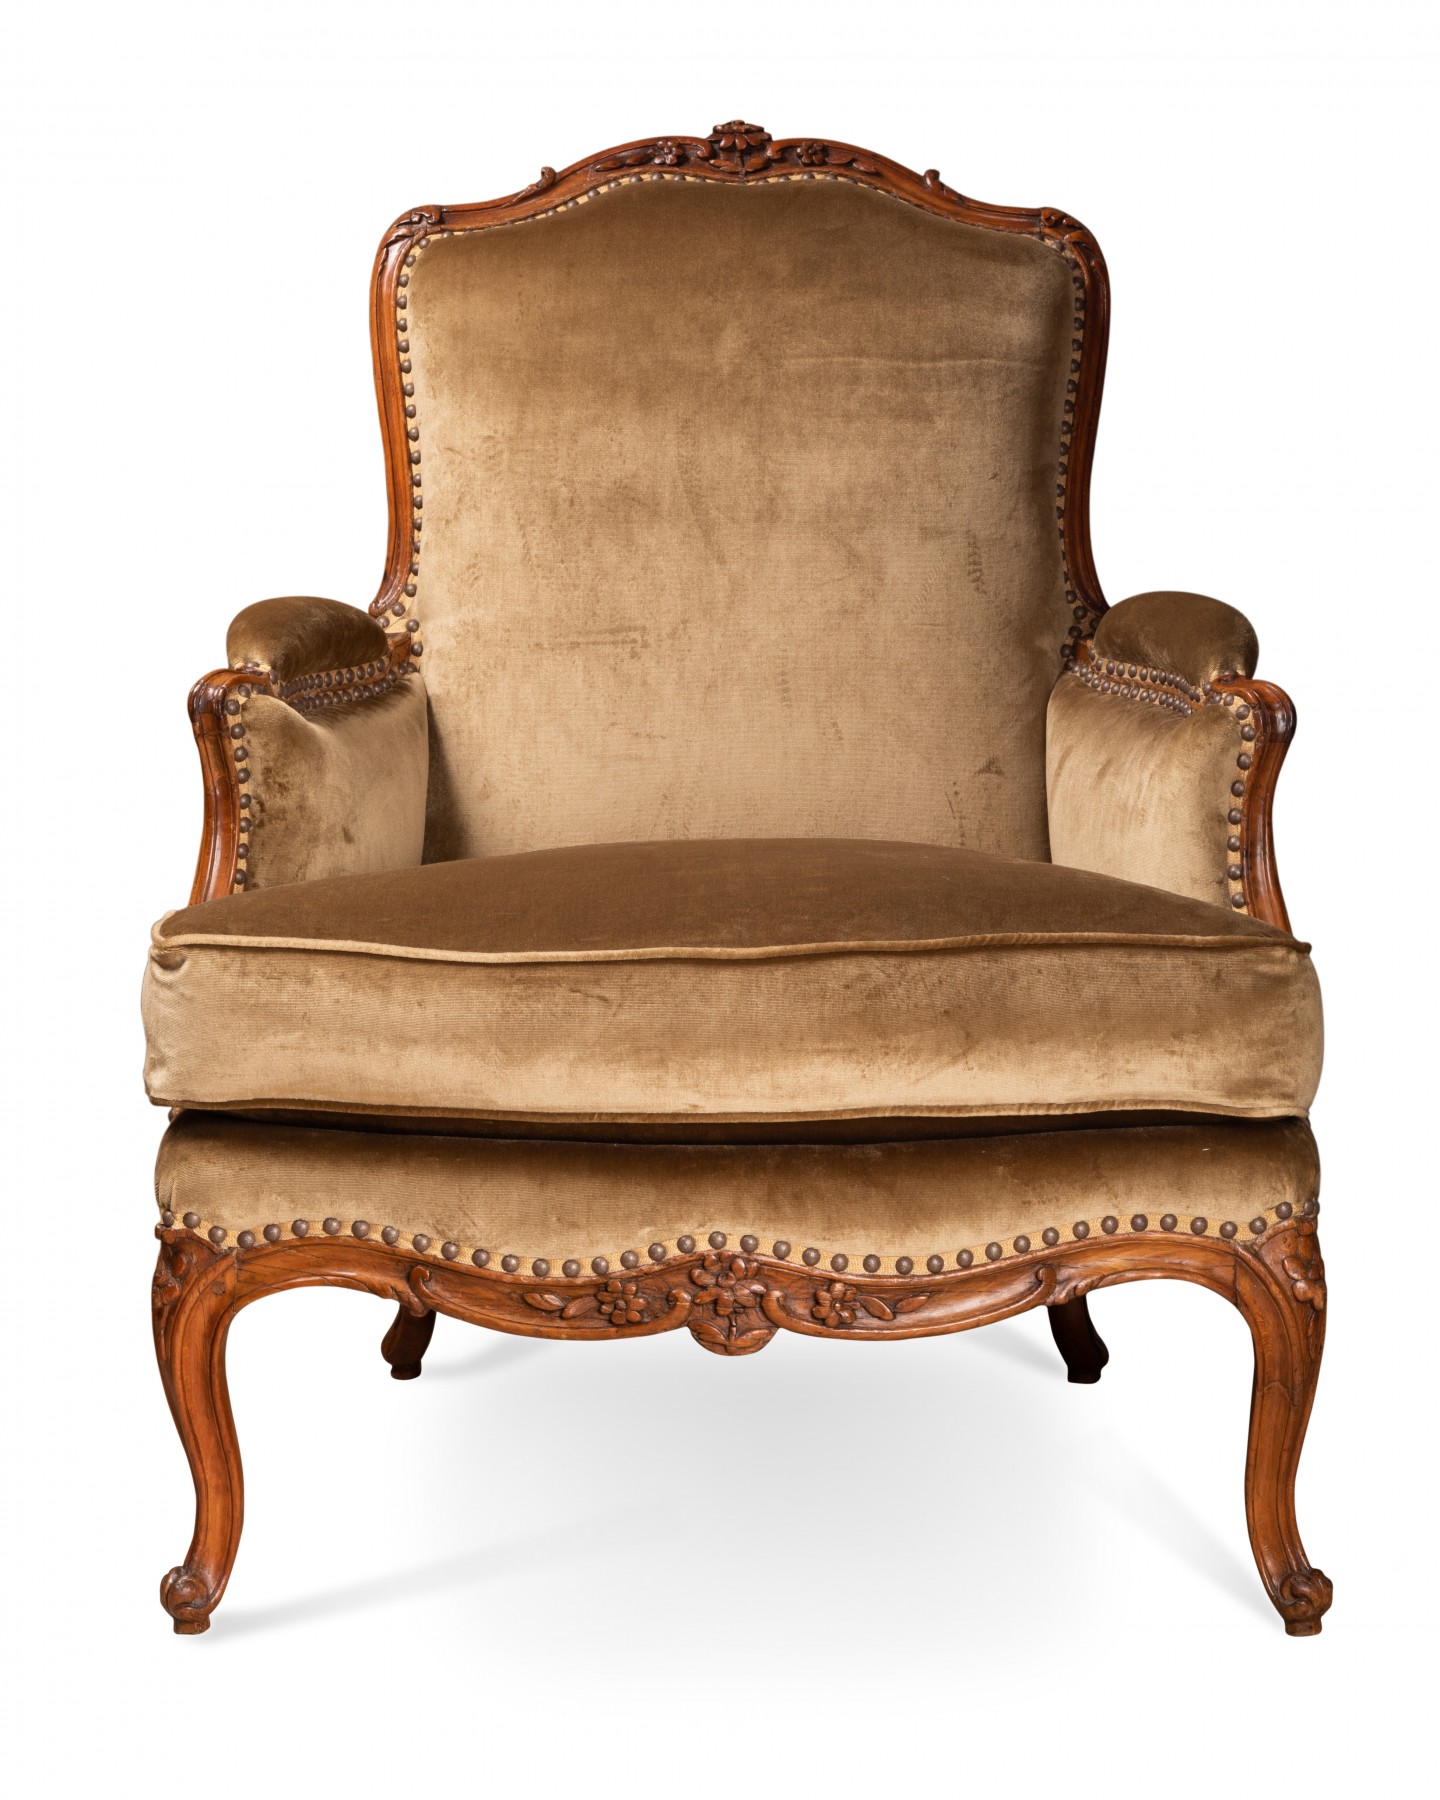 Pair of Mid-19th Century French Louis XV Style Beechwood Bergere Armchairs